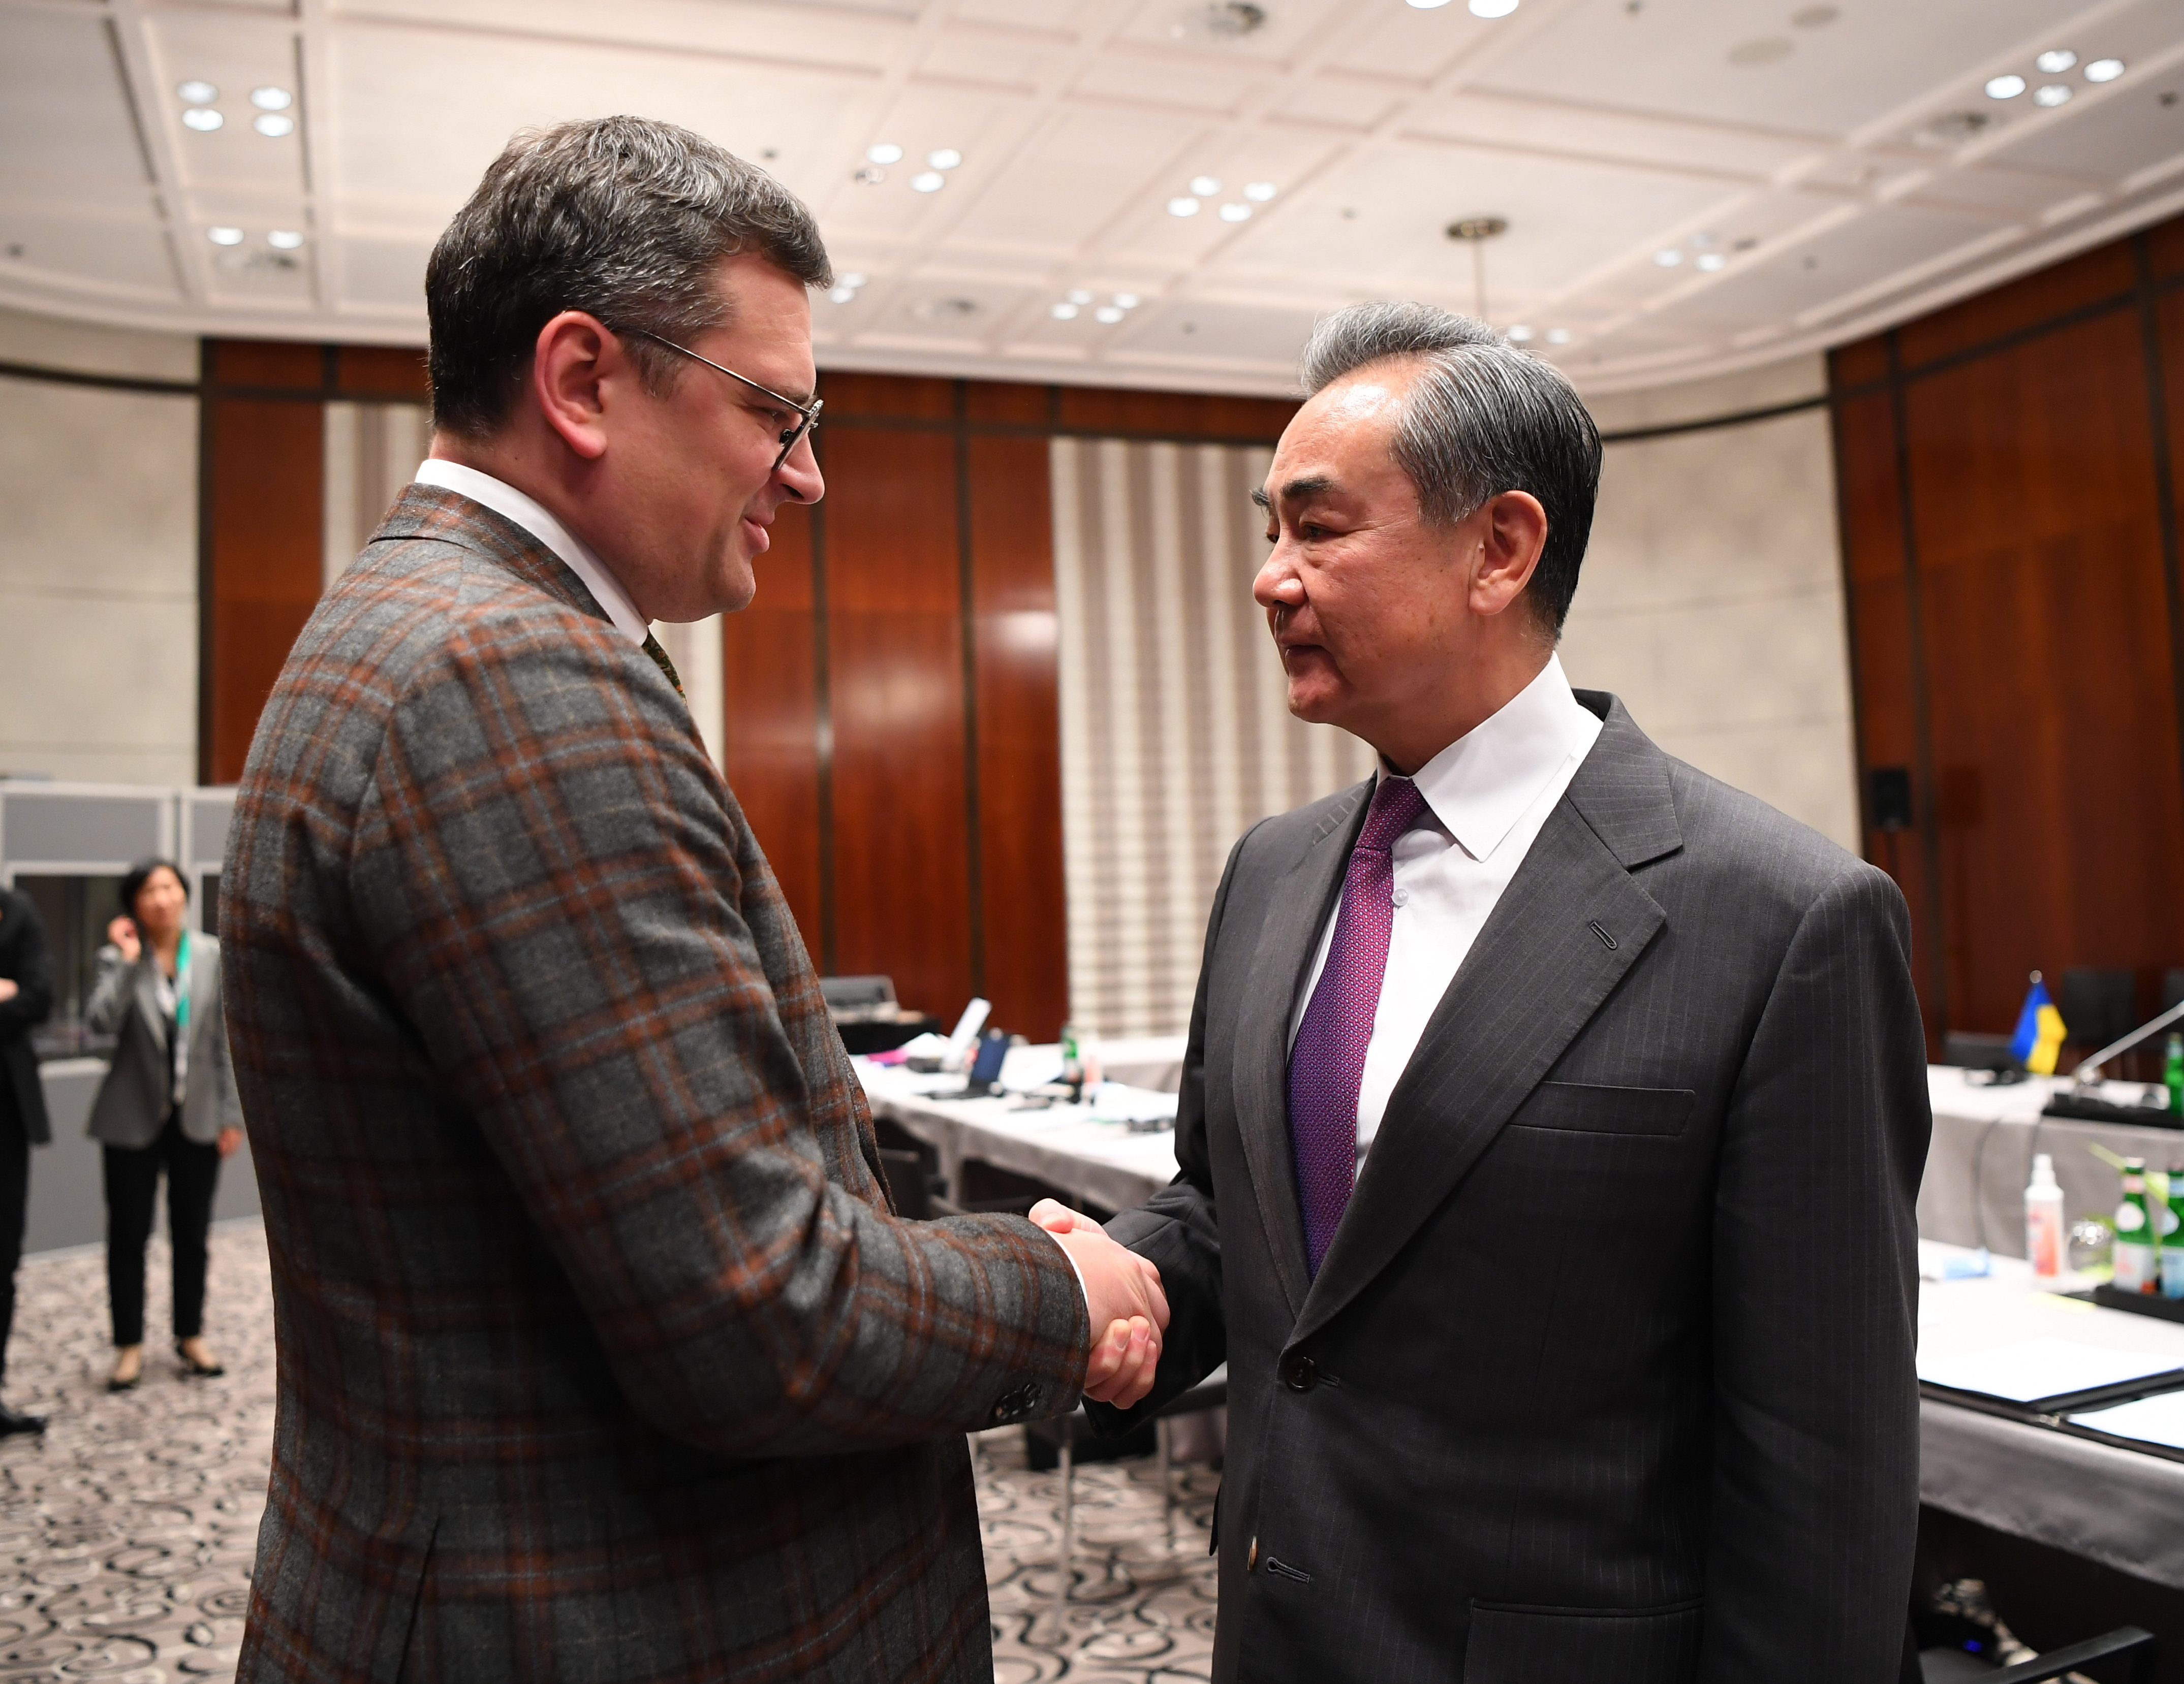 Wang Yi, a member of the Political Bureau of the CPC Central Committee and director of the Office of the Foreign Affairs Commission of the CPC Central Committee, shakes hands with Ukrainian Foreign Minister Dmytro Kuleba in Munich, Germany, February 18, 2023. /Chinese Foreign Ministry